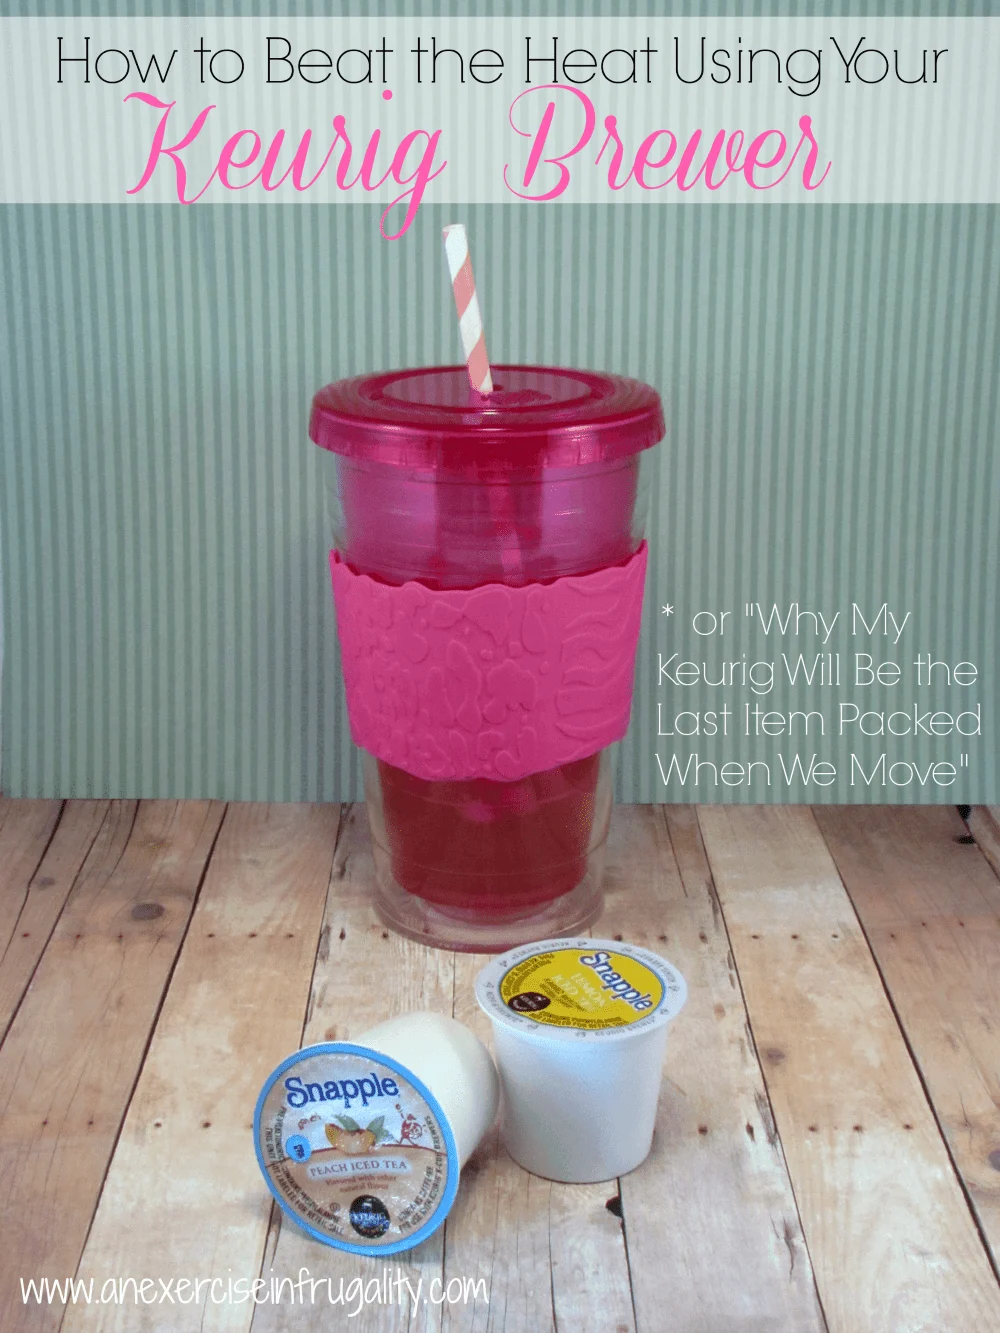 How to Use Your Keurig for Iced Tea! - An Exercise in Frugality